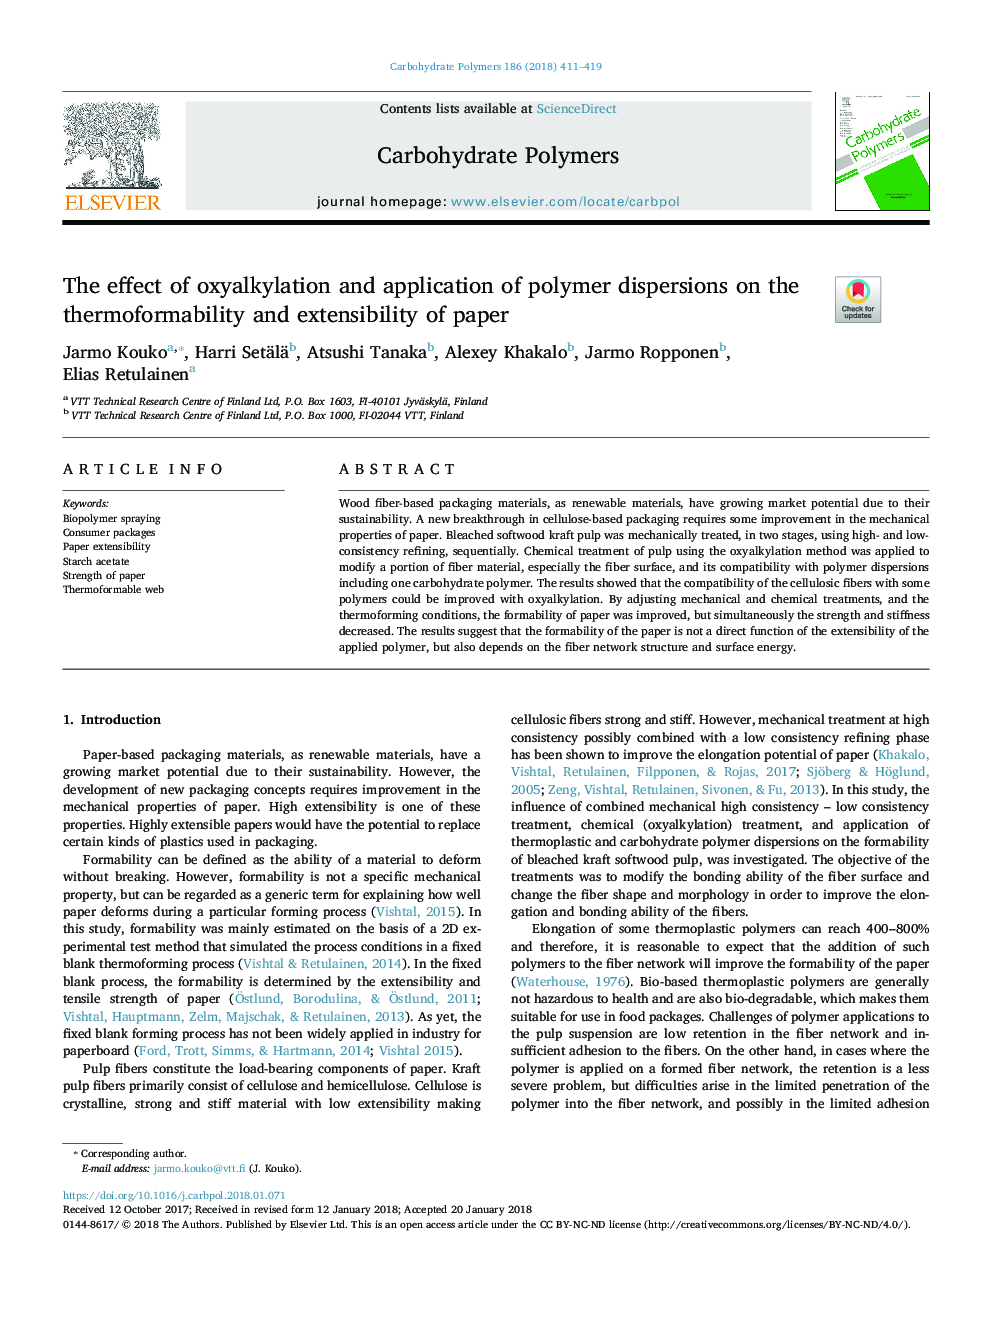 The effect of oxyalkylation and application of polymer dispersions on the thermoformability and extensibility of paper